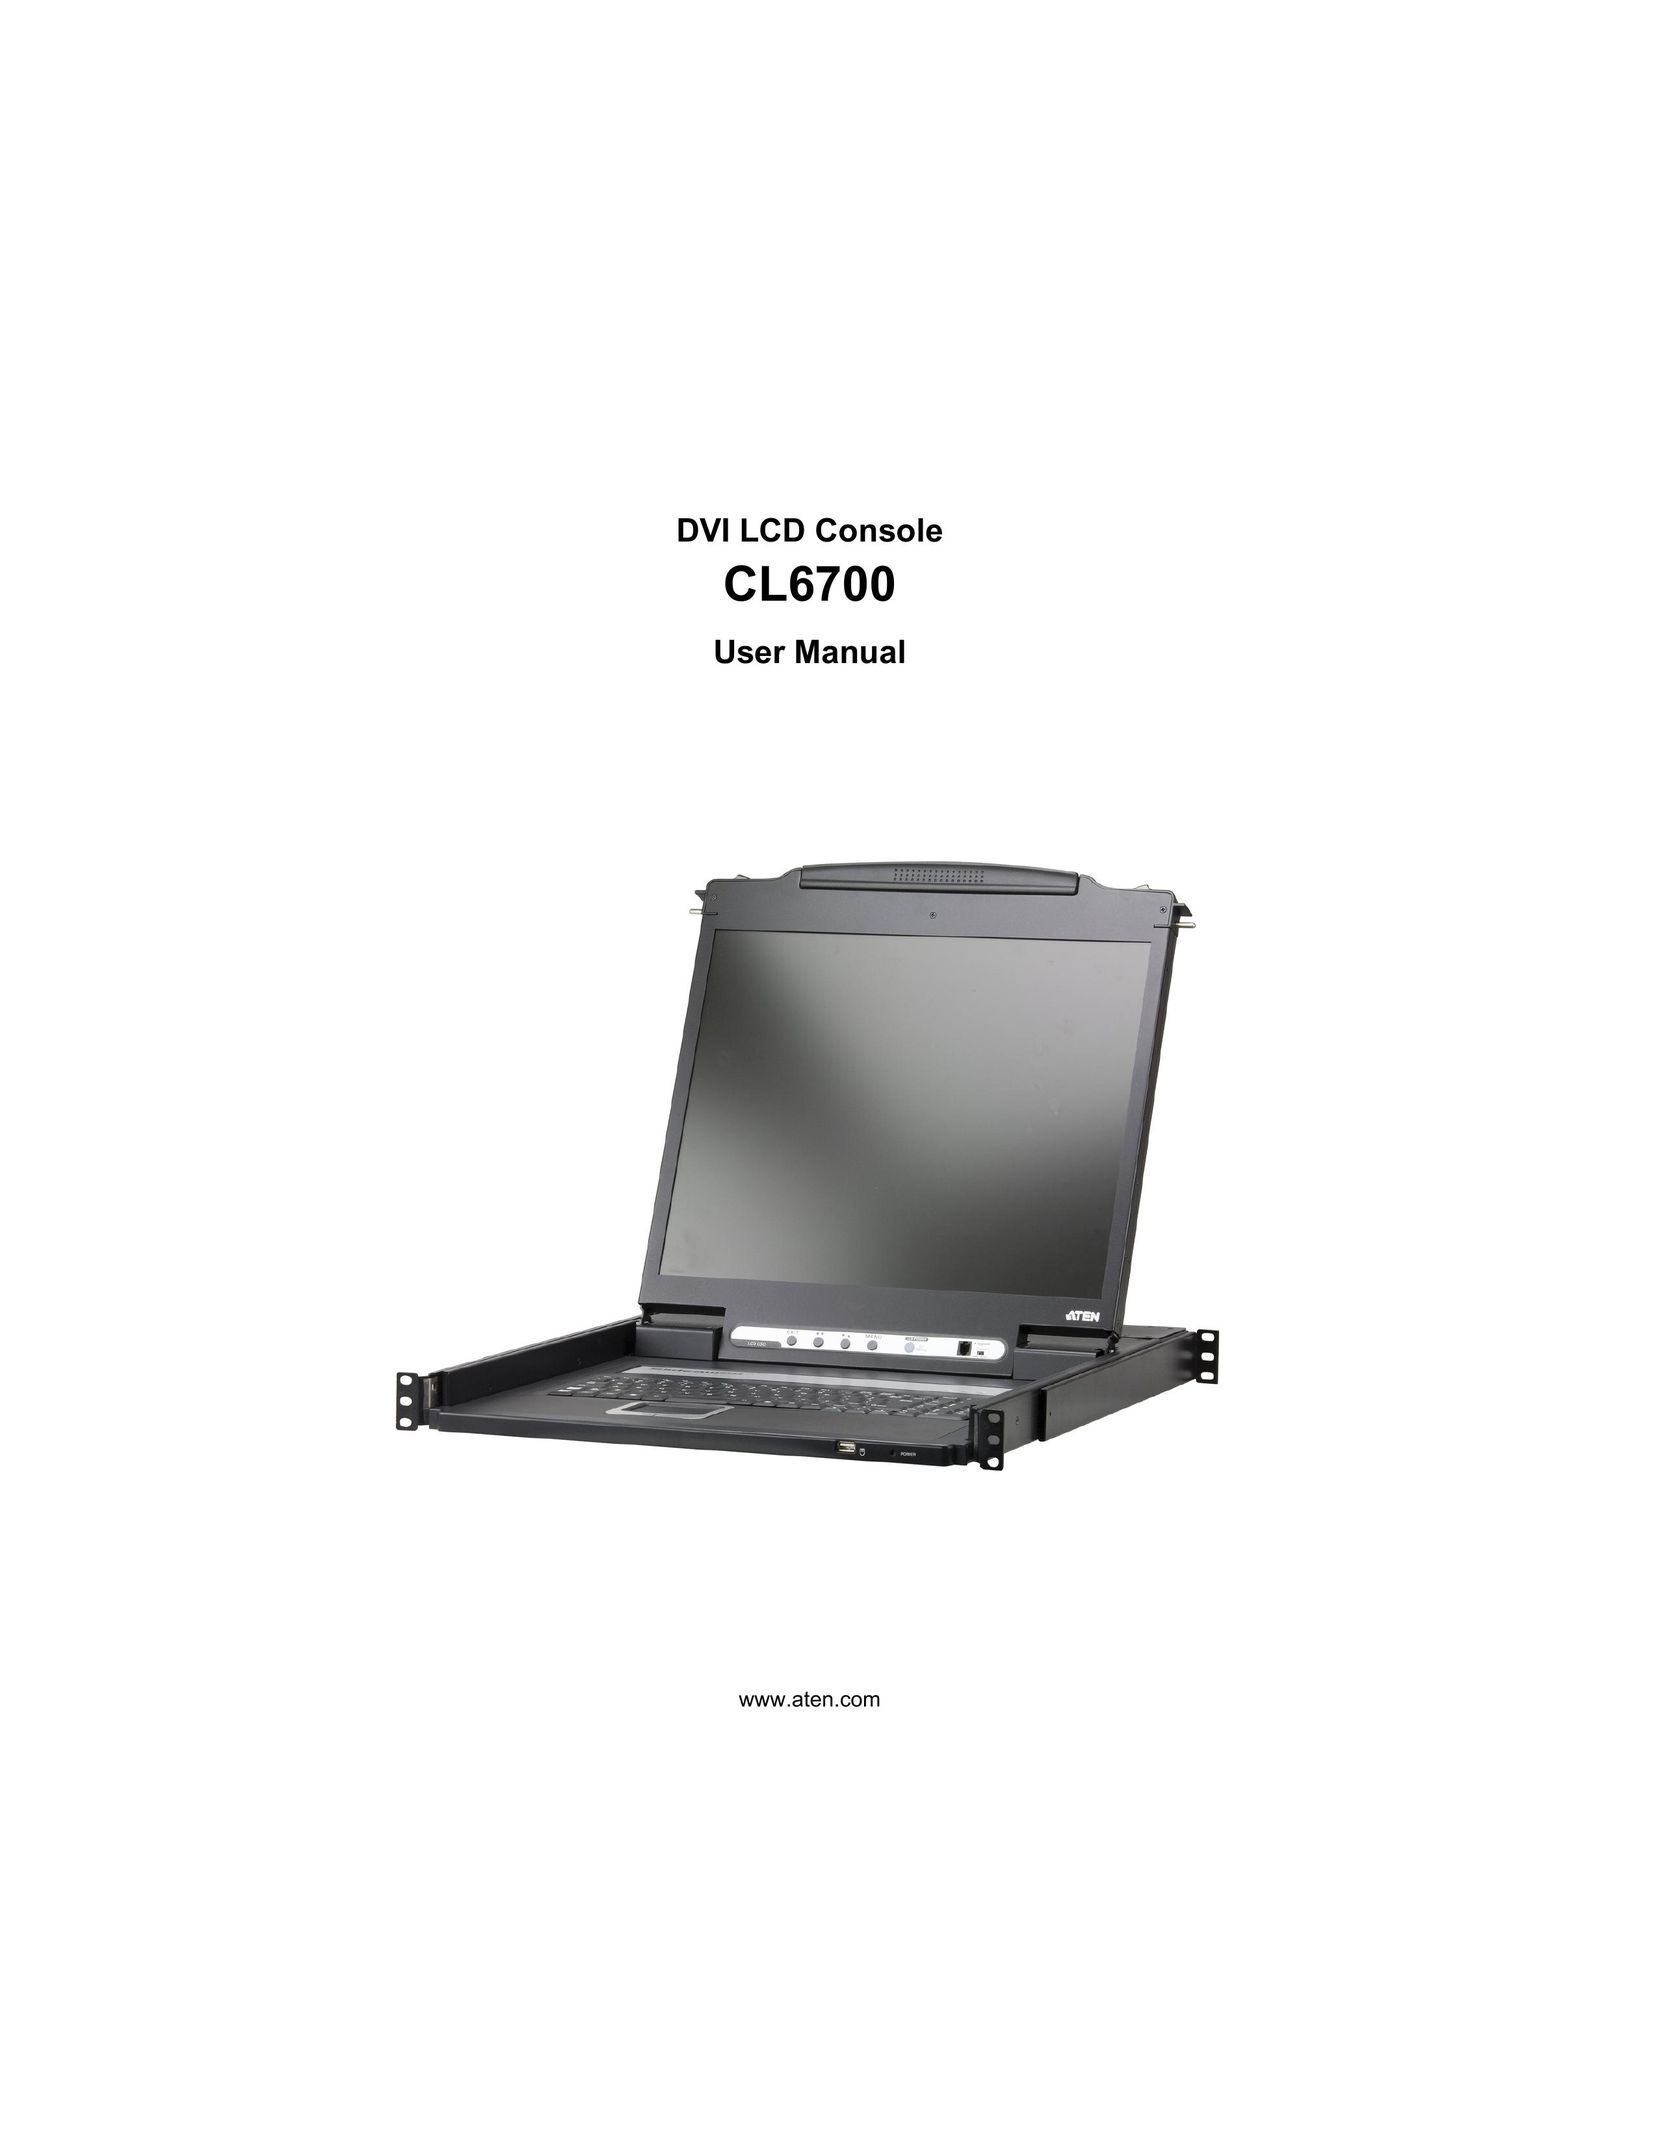 ATEN Technology CL6700 Video Gaming Accessories User Manual